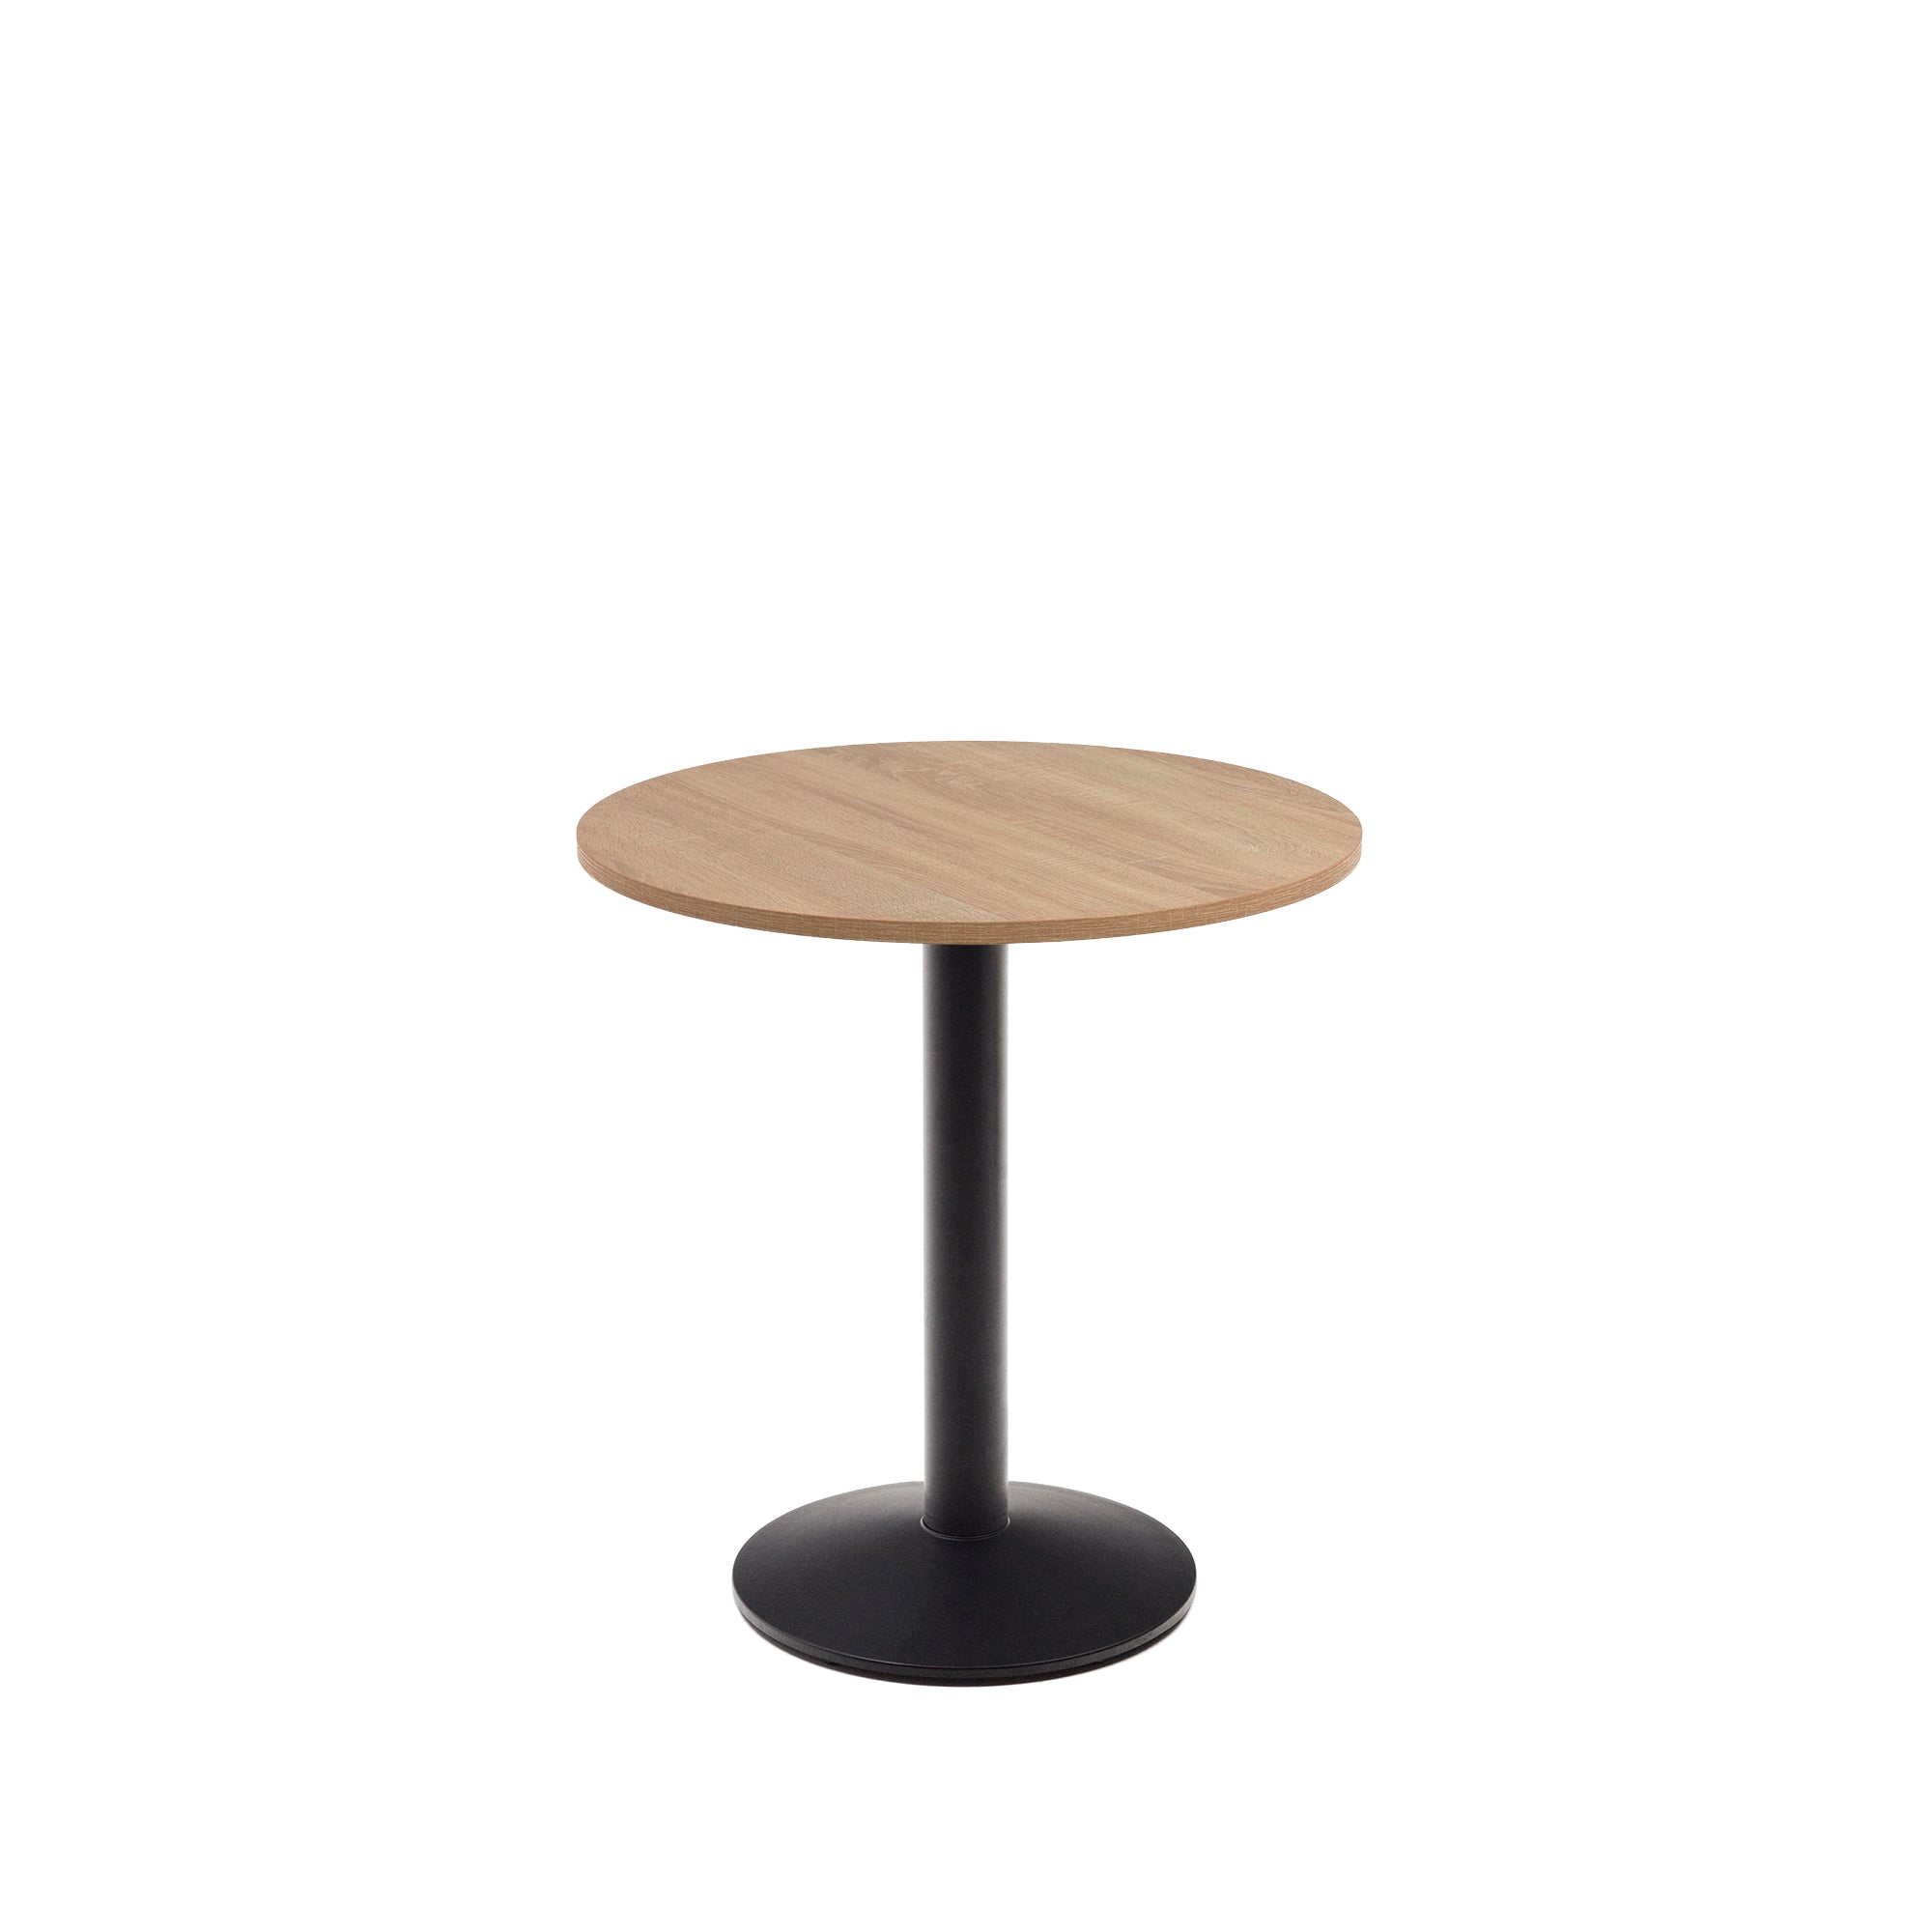 Esilda round table in natural finish melamine with metal leg in a painted black finish, Ø70x70 cm